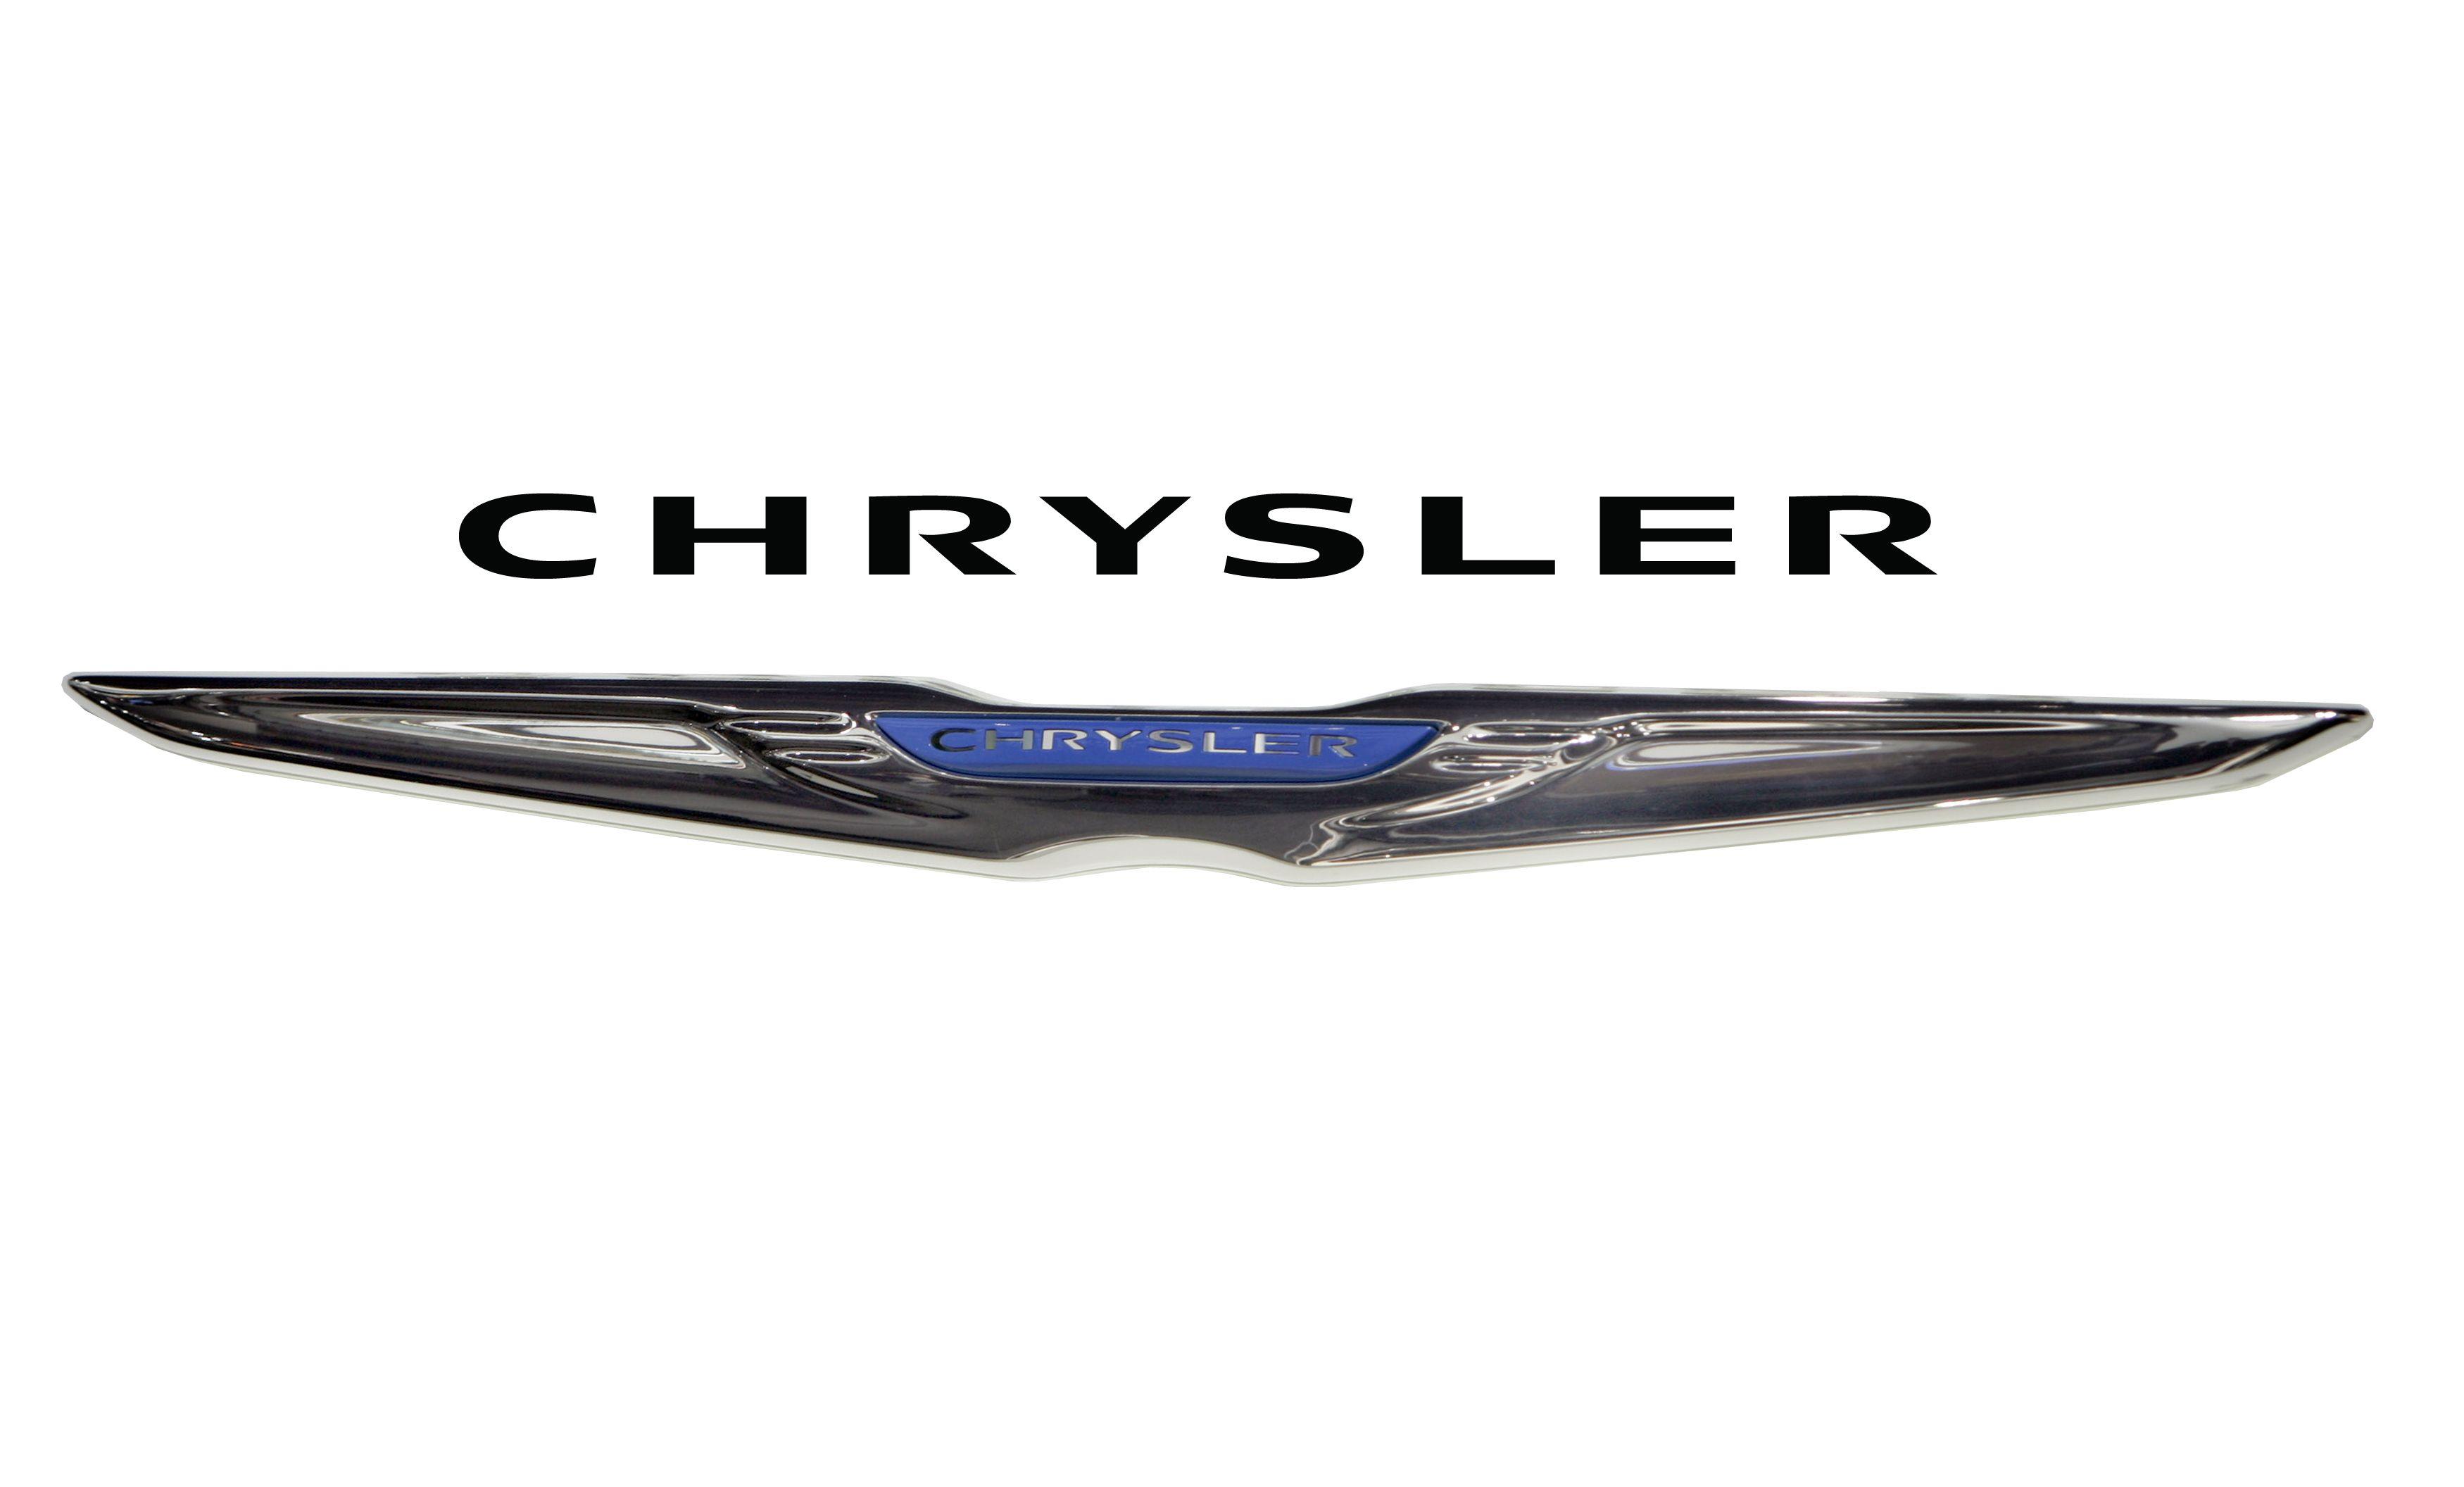 New Chrysler Logo - Chrysler Logo, Chrysler Car Symbol Meaning and History | Car Brand ...